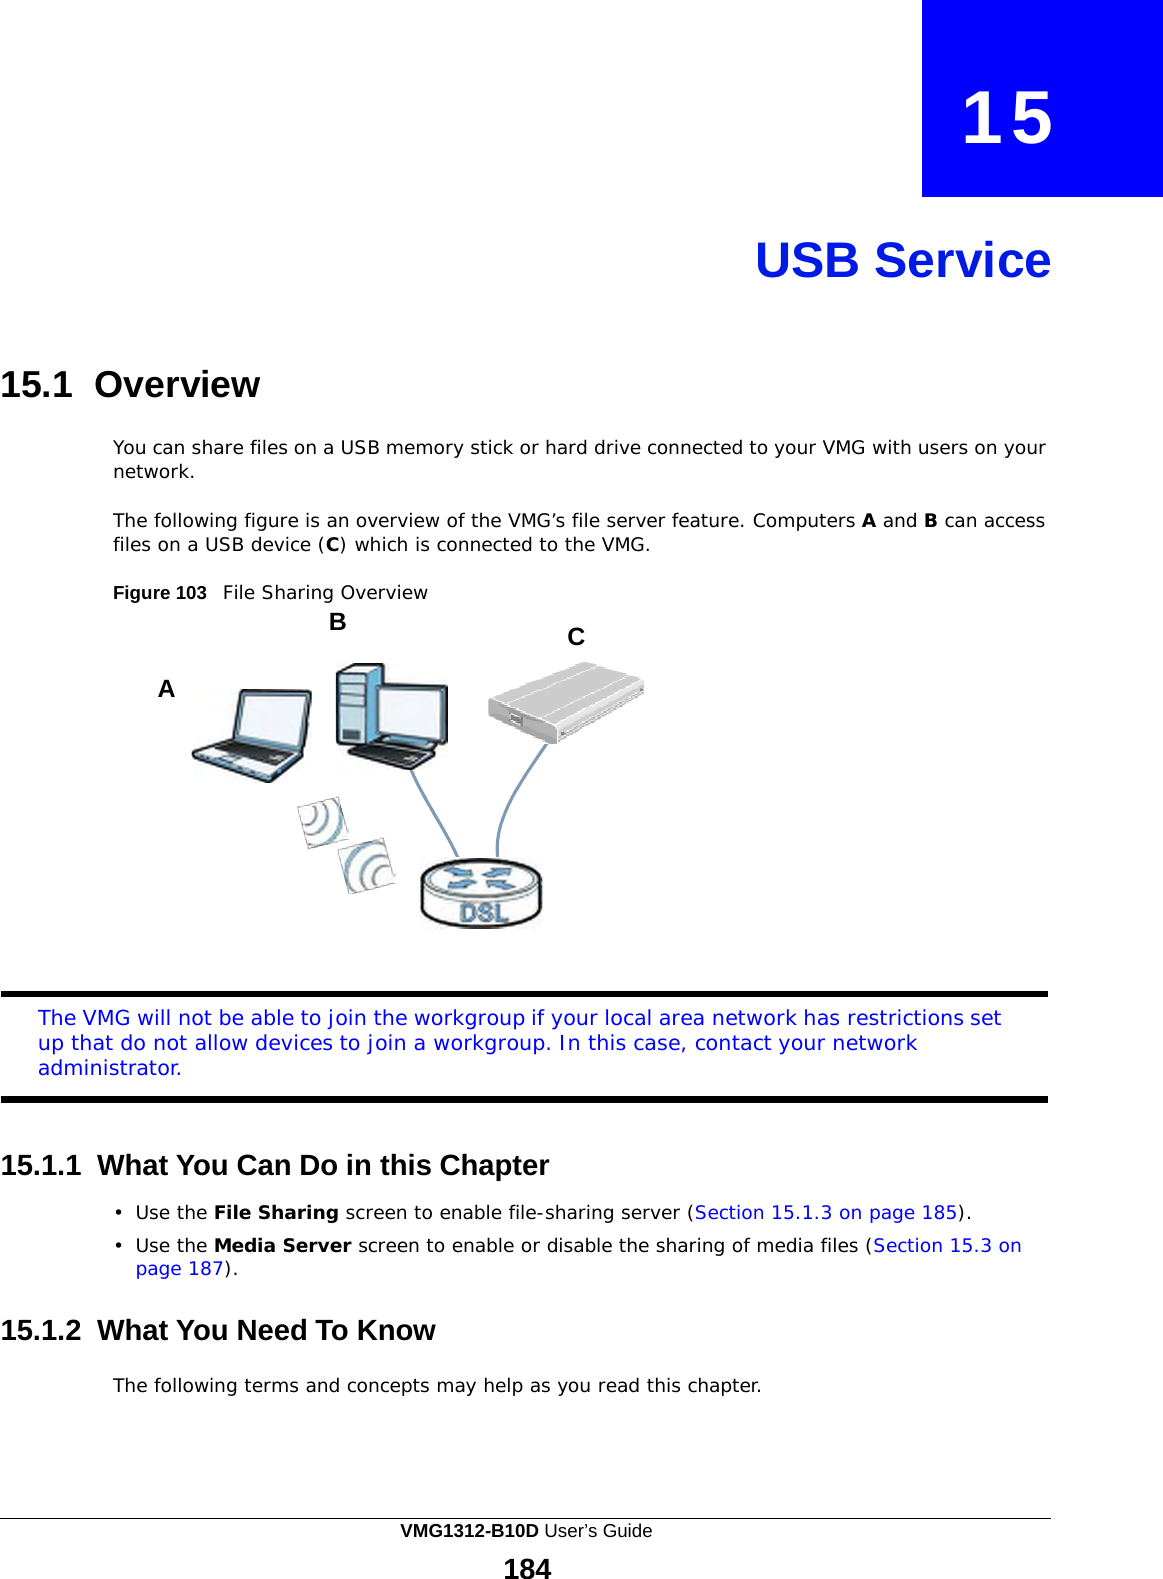              15     USB Service     15.1 Overview  You can share files on a USB memory stick or hard drive connected to your VMG with users on your network.  The following figure is an overview of the VMG’s file server feature. Computers A and B can access files on a USB device (C) which is connected to the VMG.  Figure 103   File Sharing Overview B  C  A               The VMG will not be able to join the workgroup if your local area network has restrictions set up that do not allow devices to join a workgroup. In this case, contact your network administrator.    15.1.1 What You Can Do in this Chapter  •  Use the File Sharing screen to enable file-sharing server (Section 15.1.3 on page 185).  •  Use the Media Server screen to enable or disable the sharing of media files (Section 15.3 on page 187).   15.1.2 What You Need To Know  The following terms and concepts may help as you read this chapter. VMG1312-B10D User’s Guide 184  